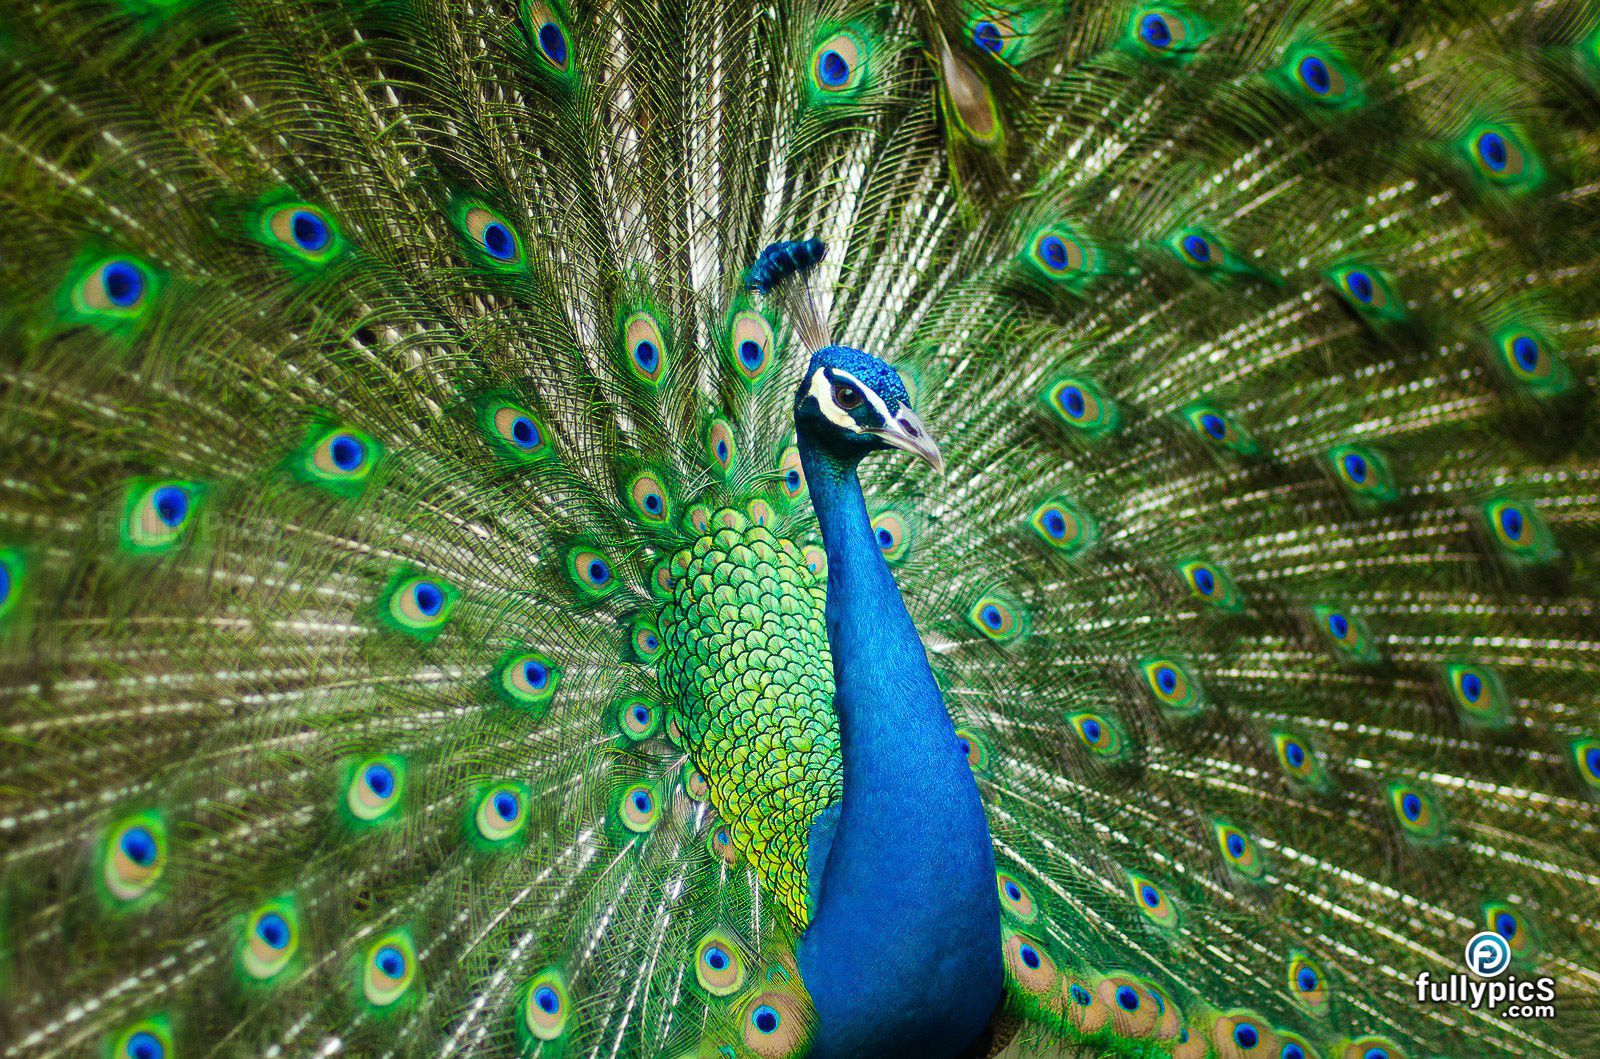 Peacock HD Picture Gallery